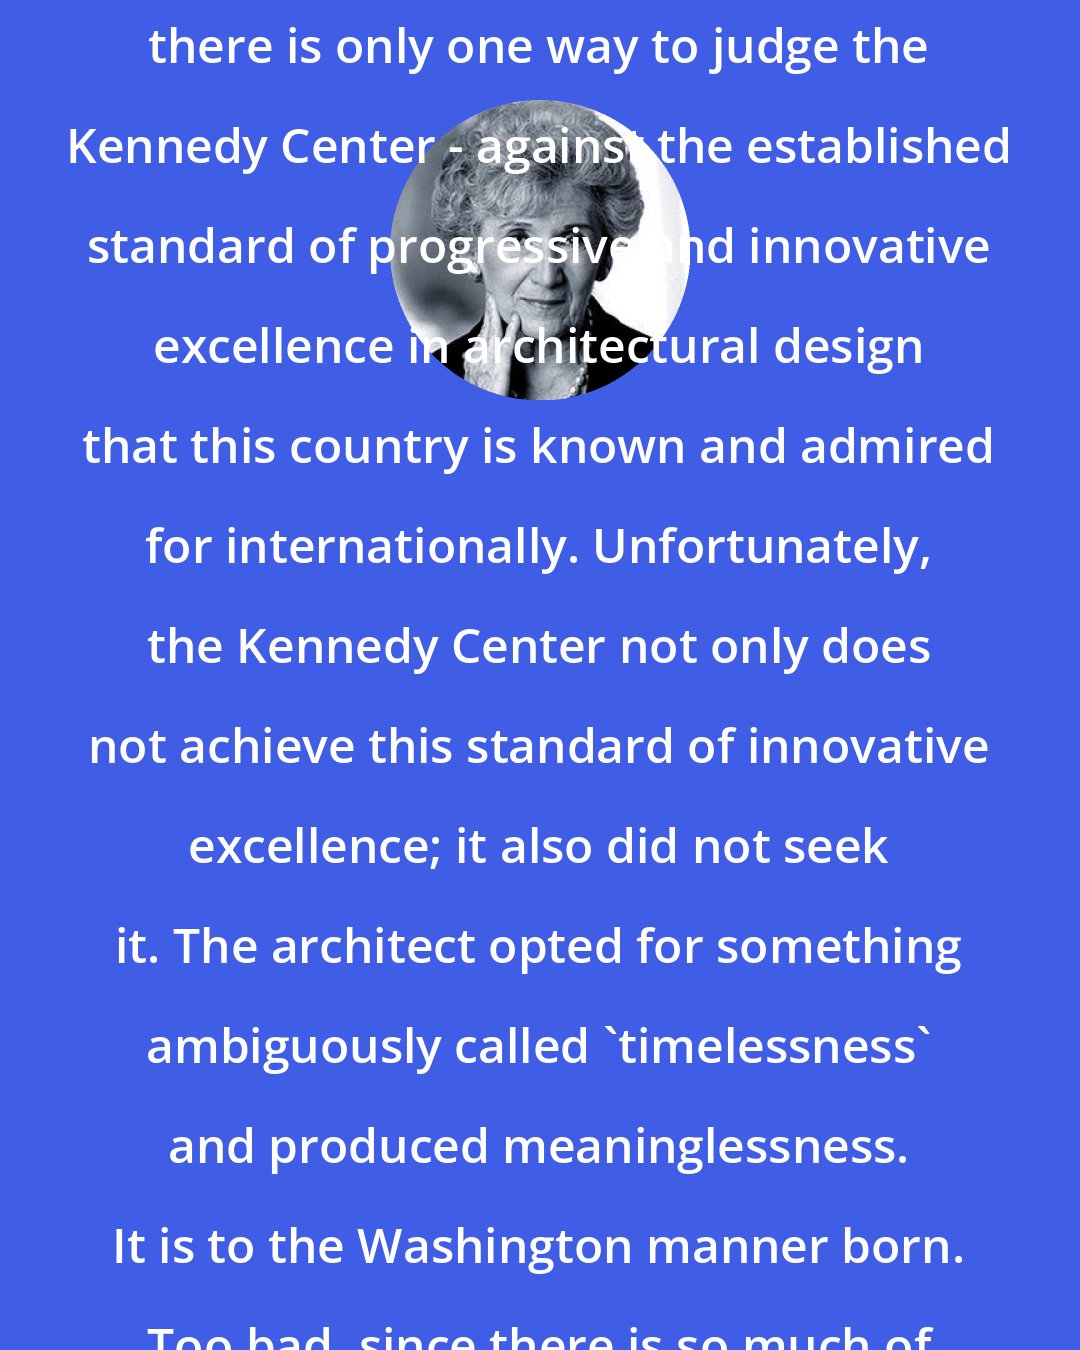 Ada Louise Huxtable: Because it is a national landmark, there is only one way to judge the Kennedy Center - against the established standard of progressive and innovative excellence in architectural design that this country is known and admired for internationally. Unfortunately, the Kennedy Center not only does not achieve this standard of innovative excellence; it also did not seek it. The architect opted for something ambiguously called 'timelessness' and produced meaninglessness. It is to the Washington manner born. Too bad, since there is so much of it.